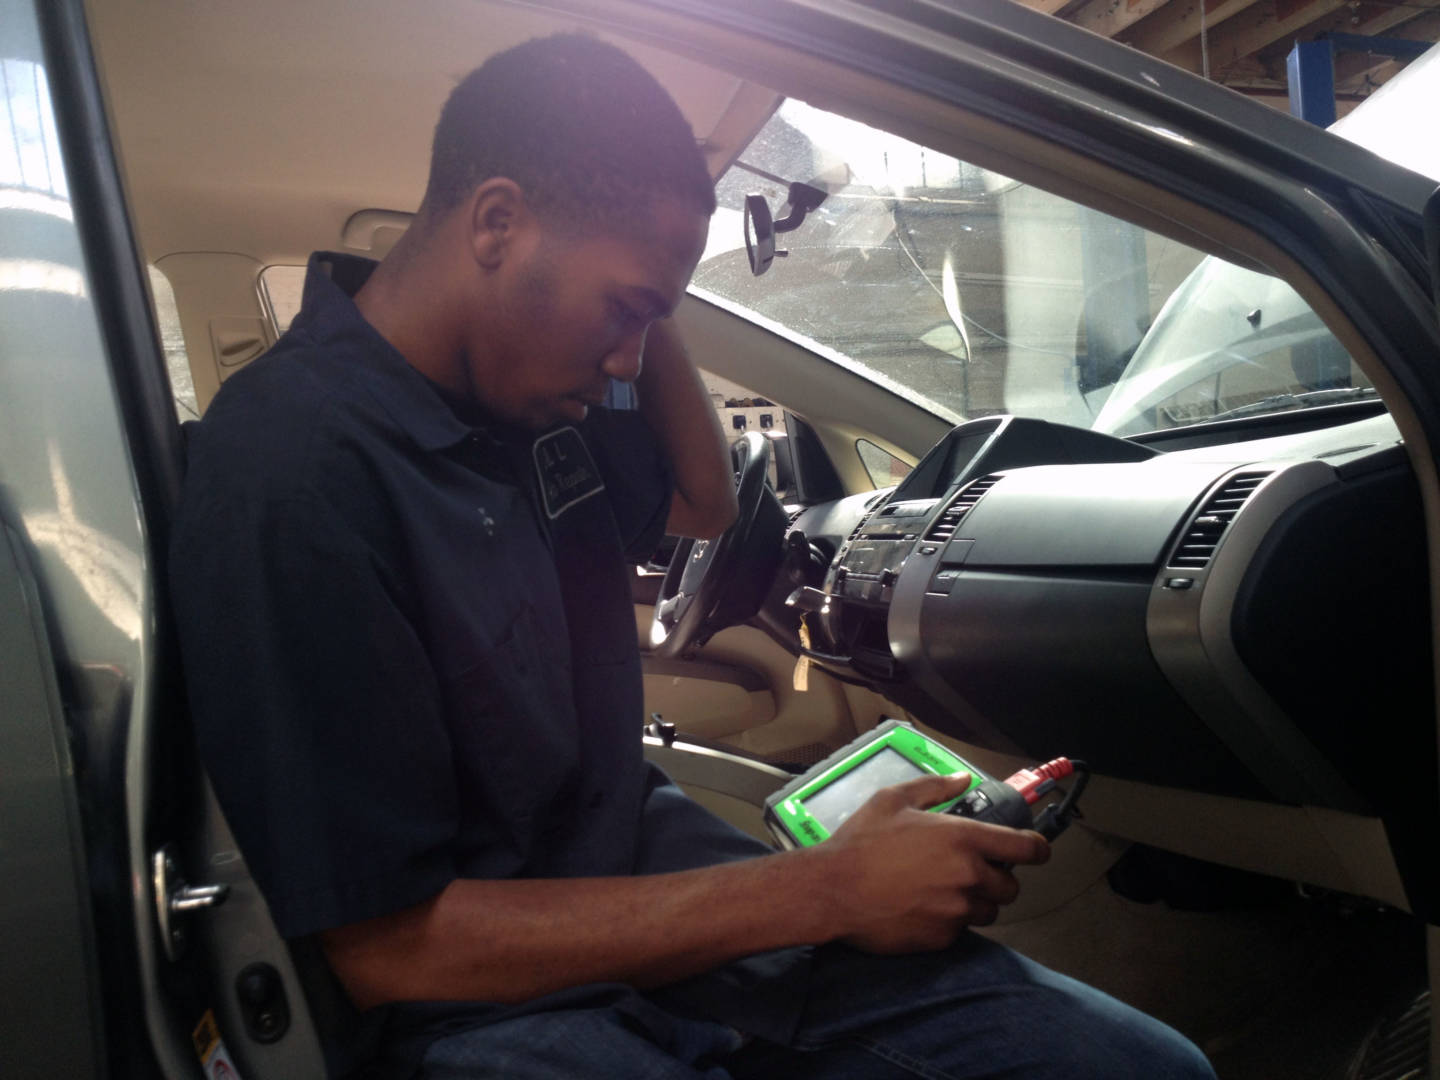 Kris uses specialized equipment to look at information on a car's computer.